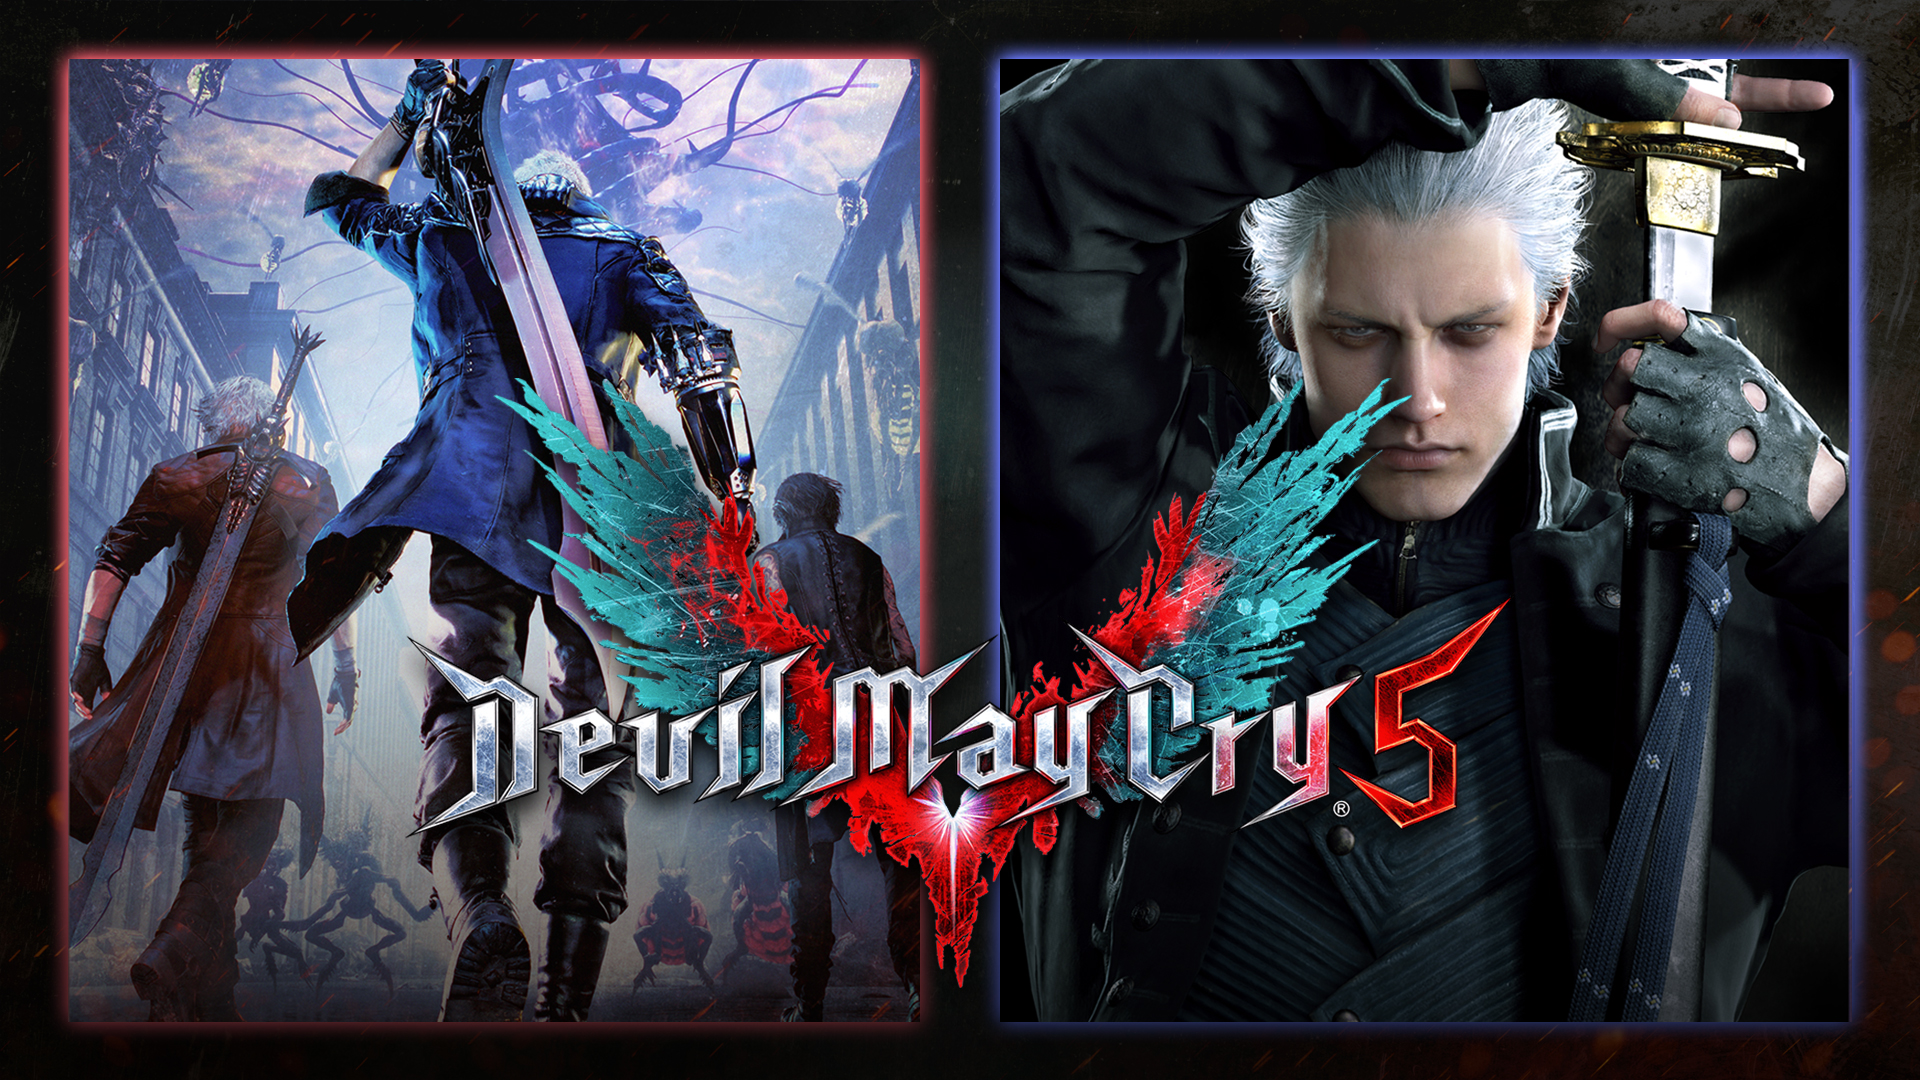 devil may cry on pc